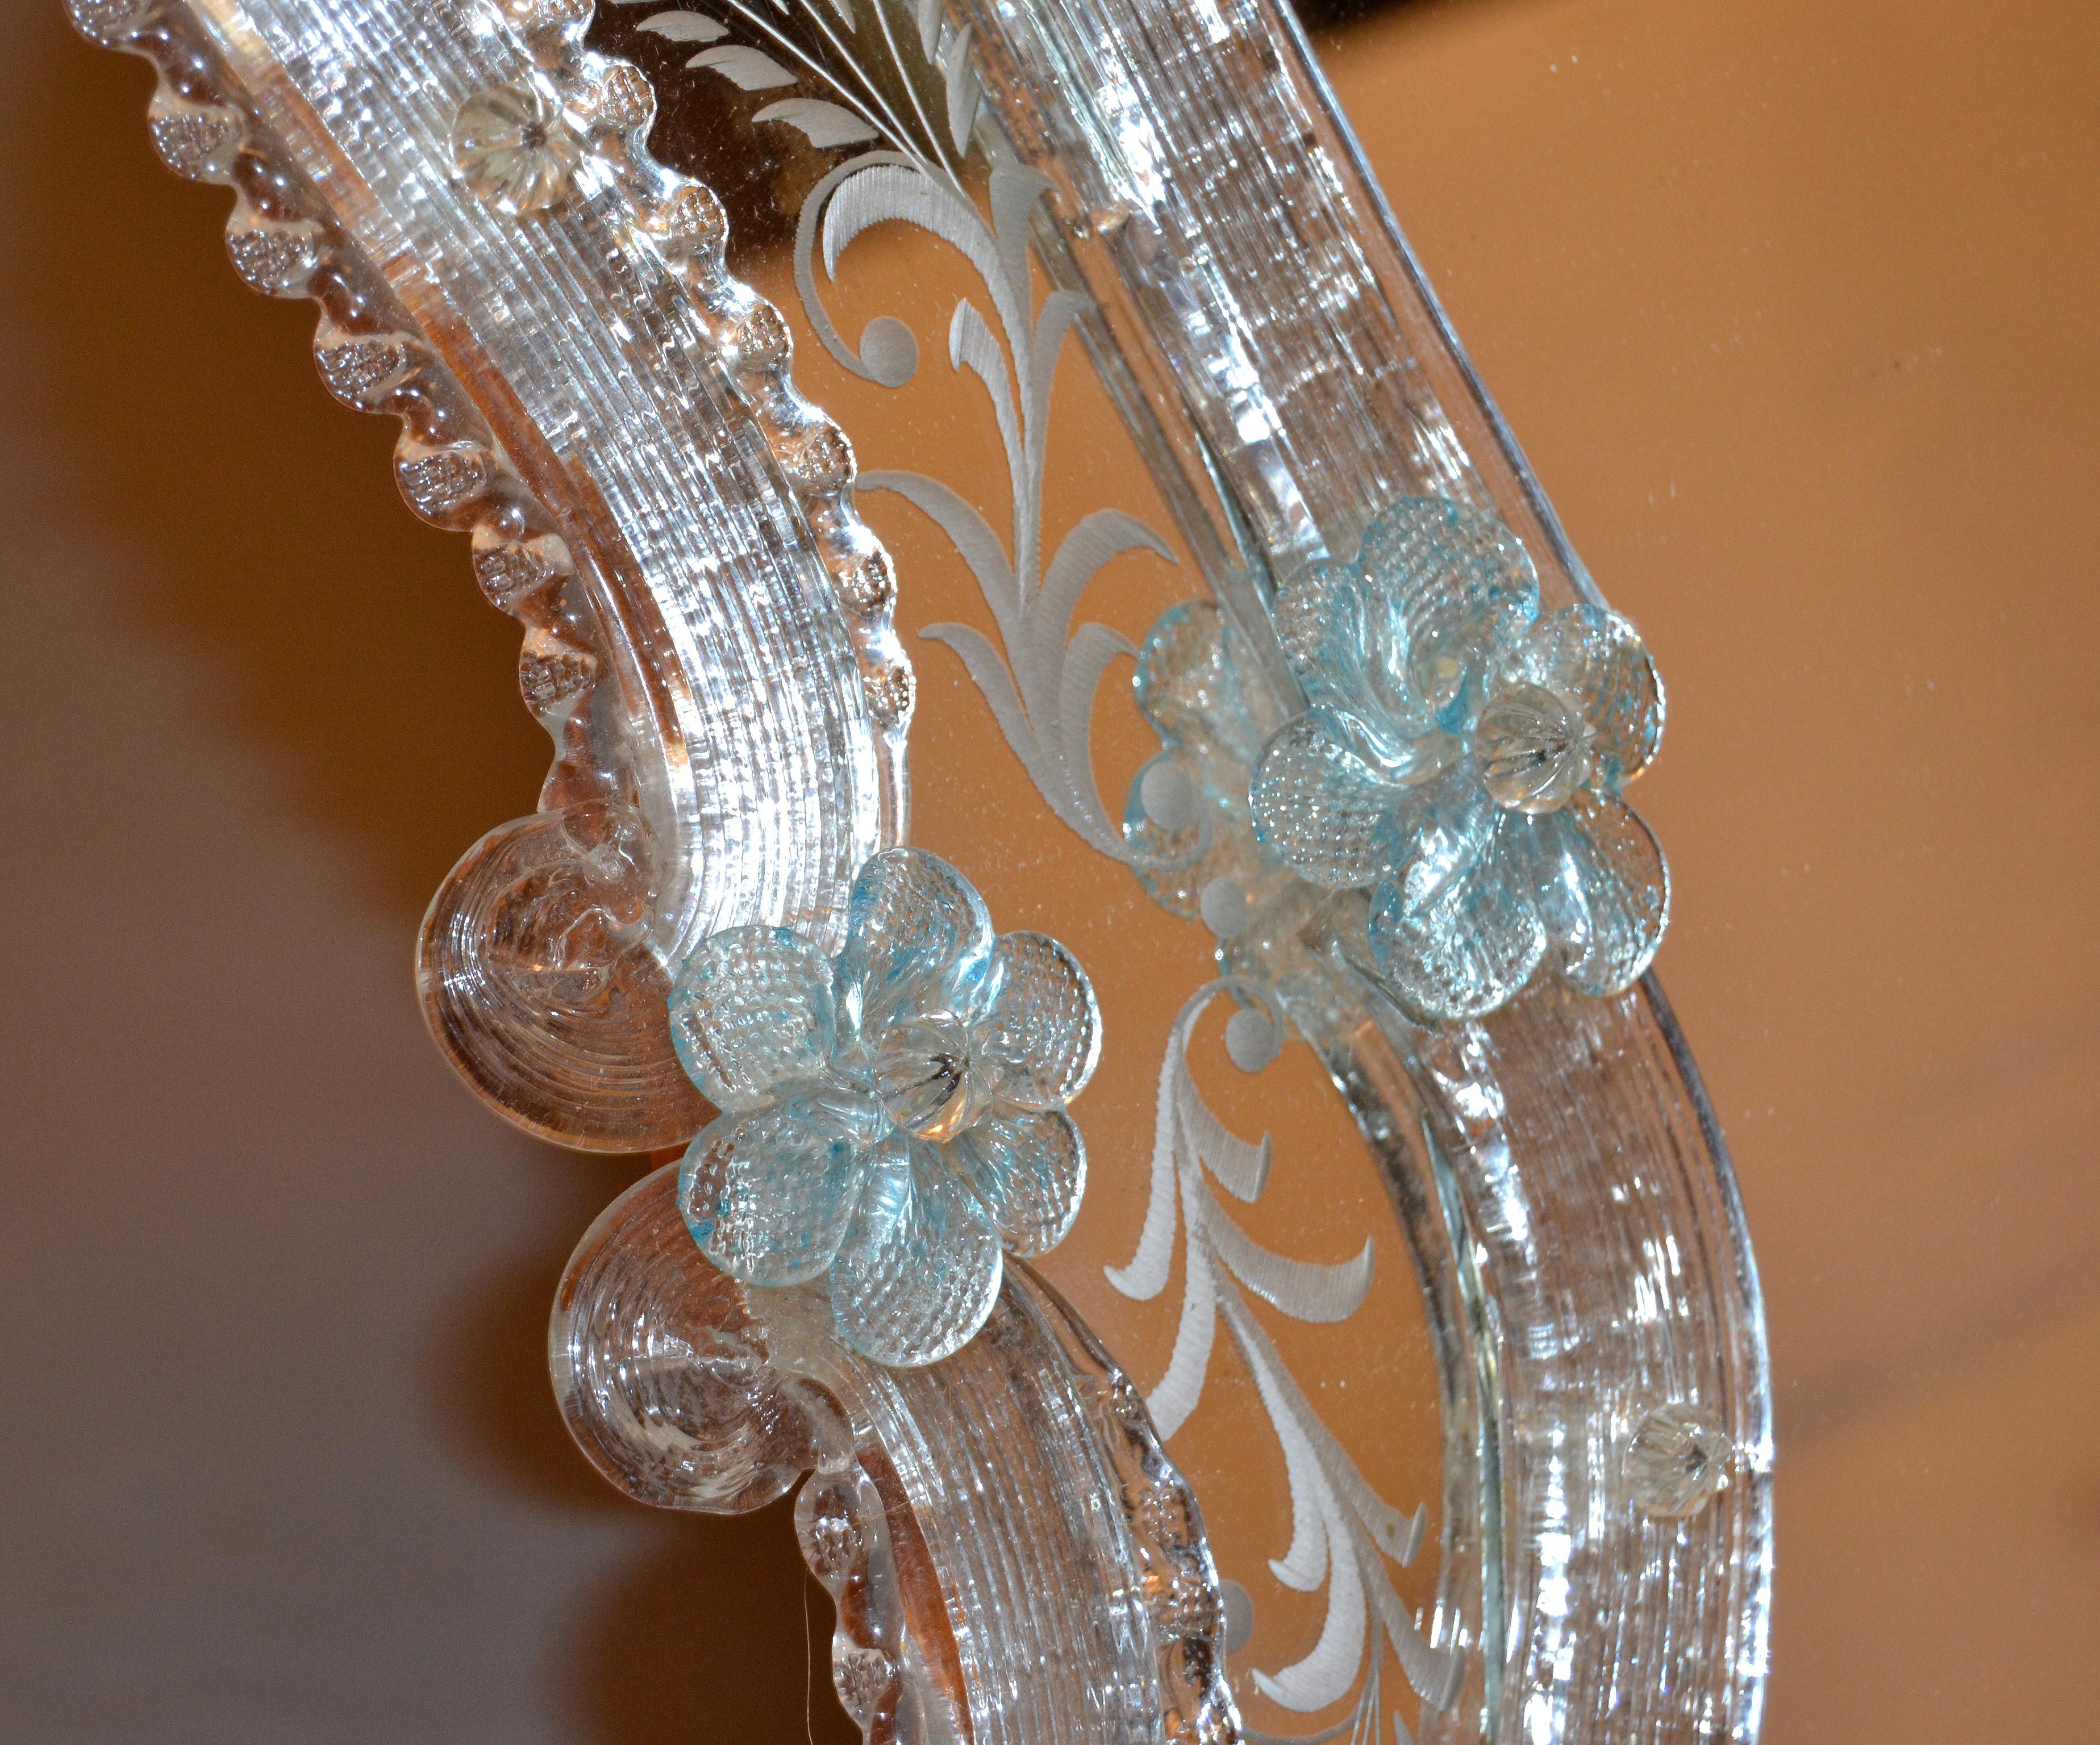 20th Century Fratelli Tosi Venetian Glass Vanity, Table Mirror with Blue Flowers, Italy